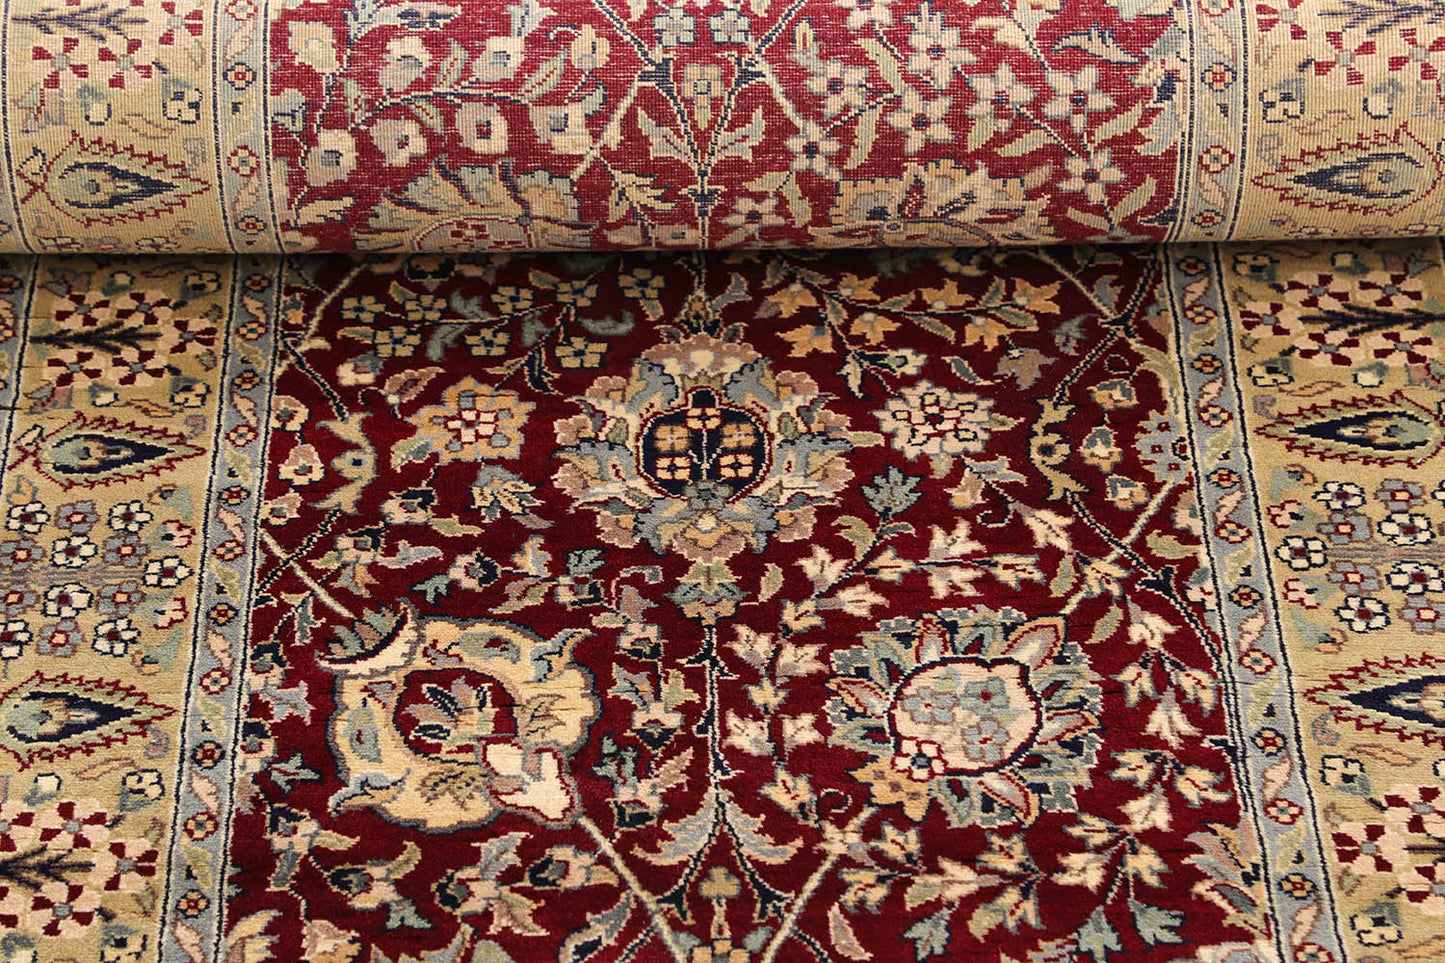 Hand-Knotted Lahore Carpet 2'.6" X 9' Oriental, Red Fine Wool Runner Rug 2.5x10